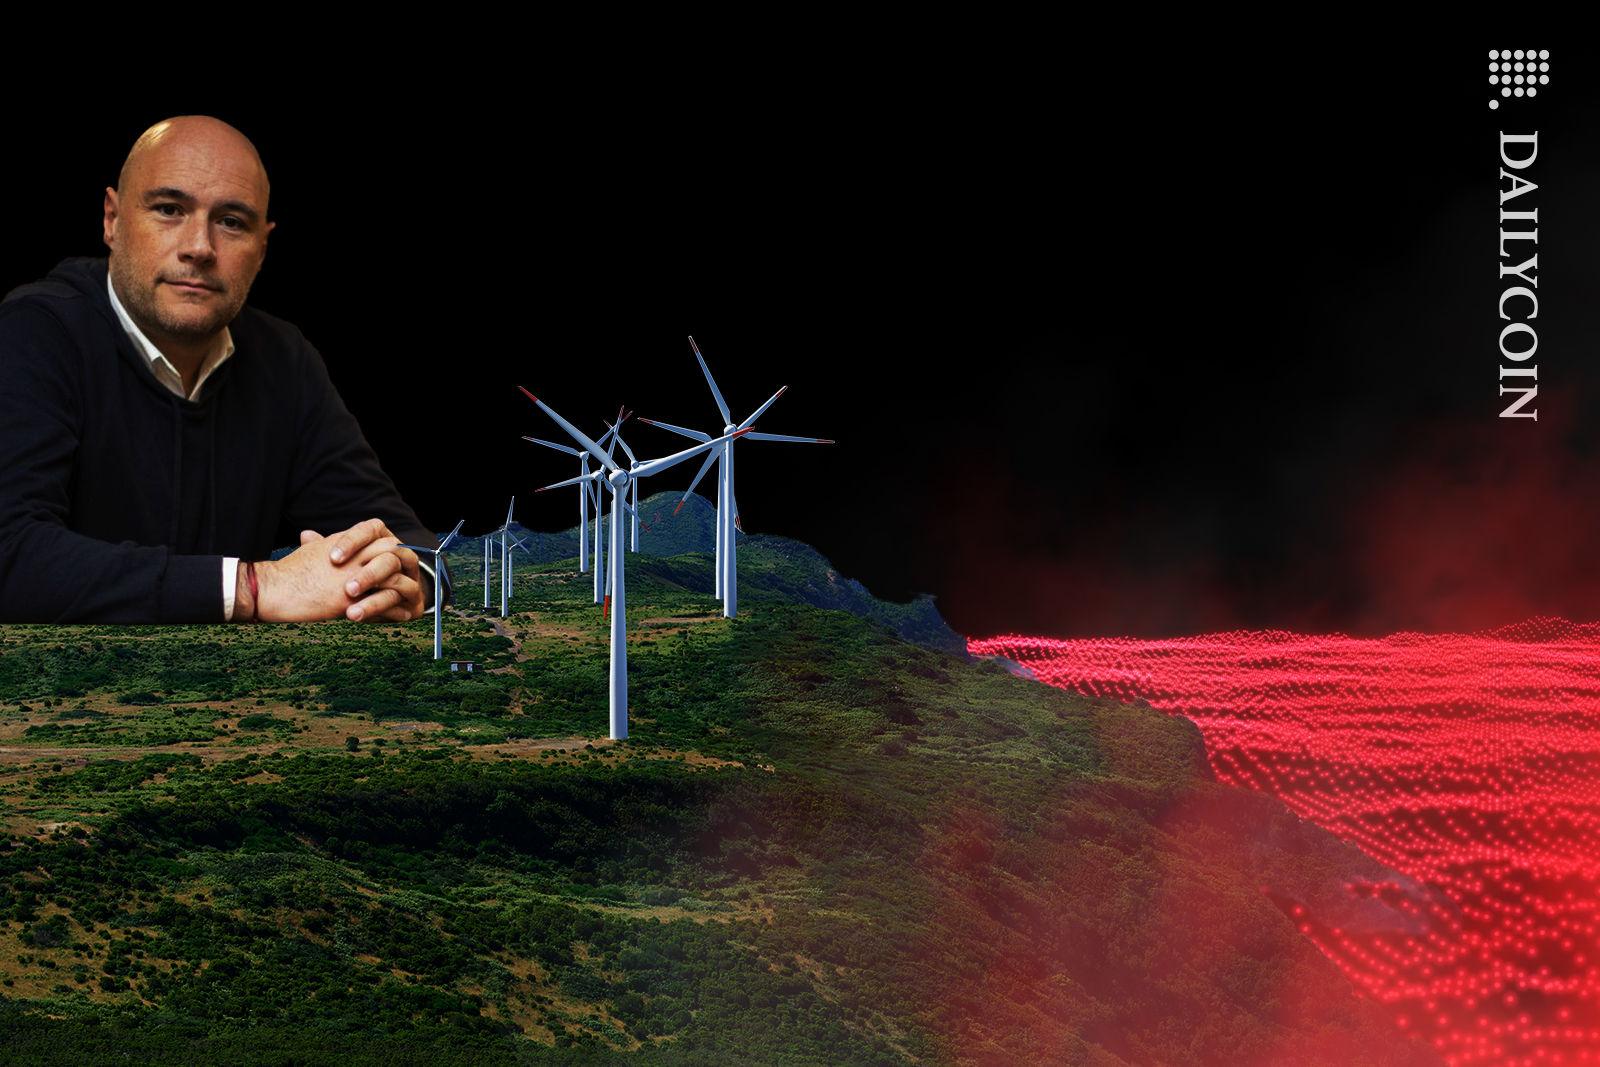 Chilliz CEO Alexandre Dreyfus focused on green energy for his digital space.